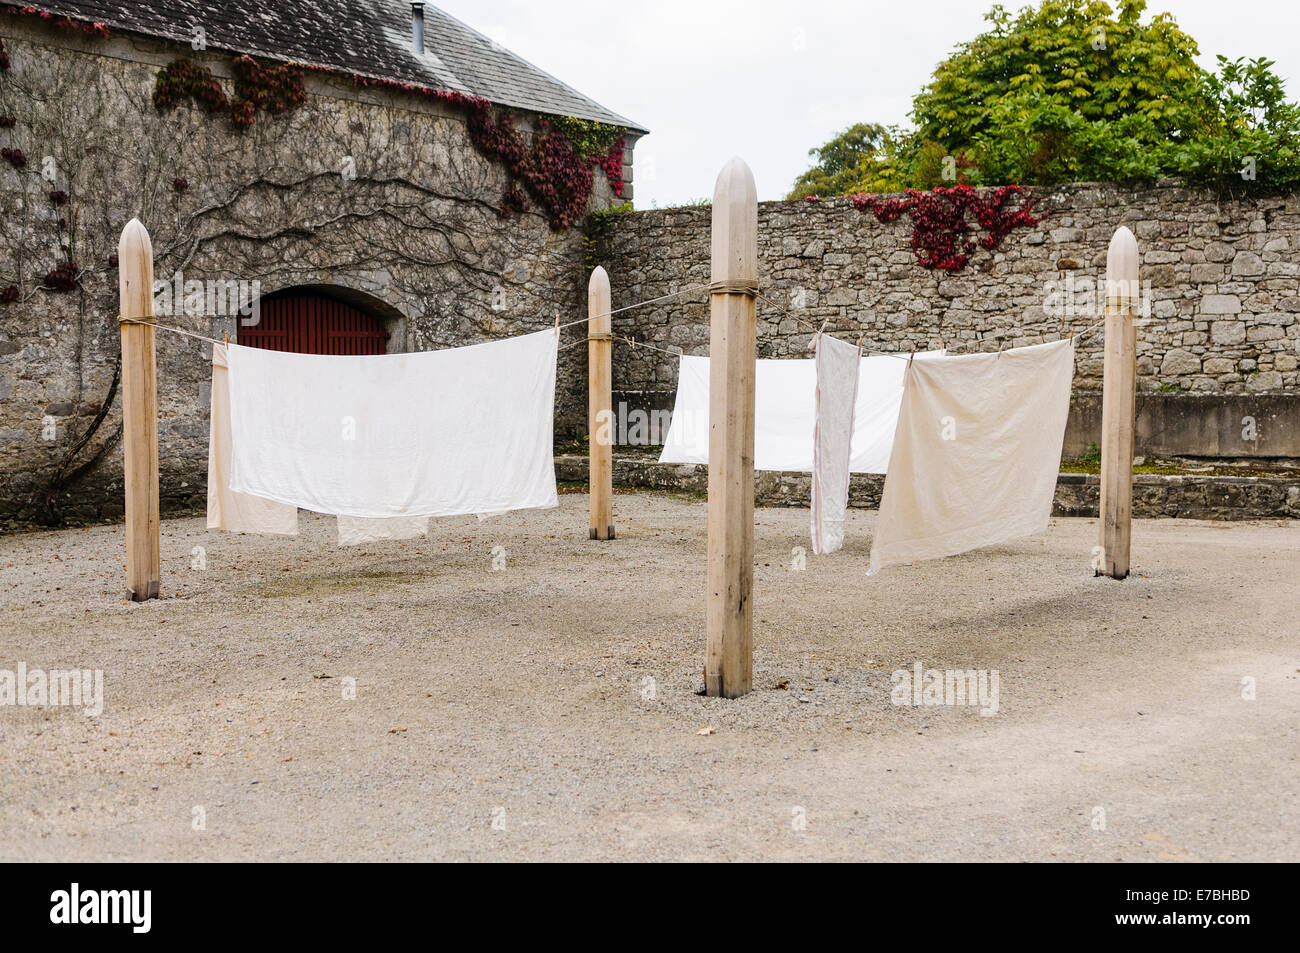 Old fashioned clothes line in the courtyard of a stately home Stock Photo